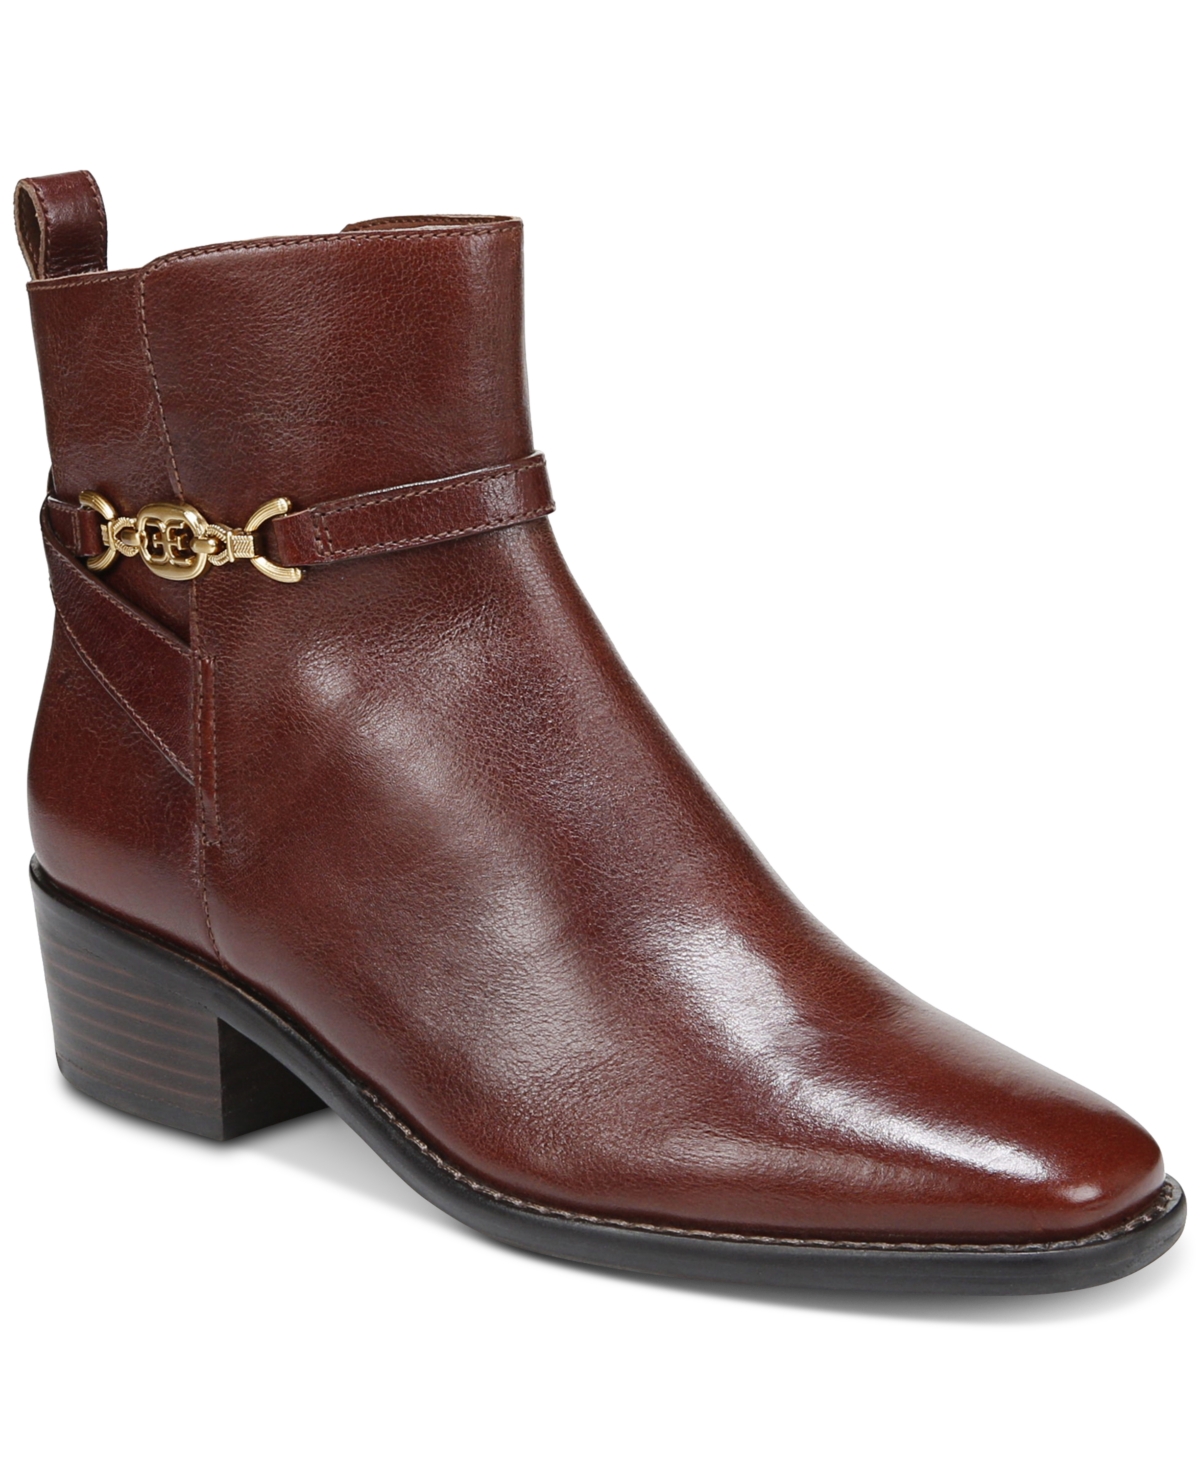 Women's Brawley Buckled Ankle Boots - Chocolate Brown